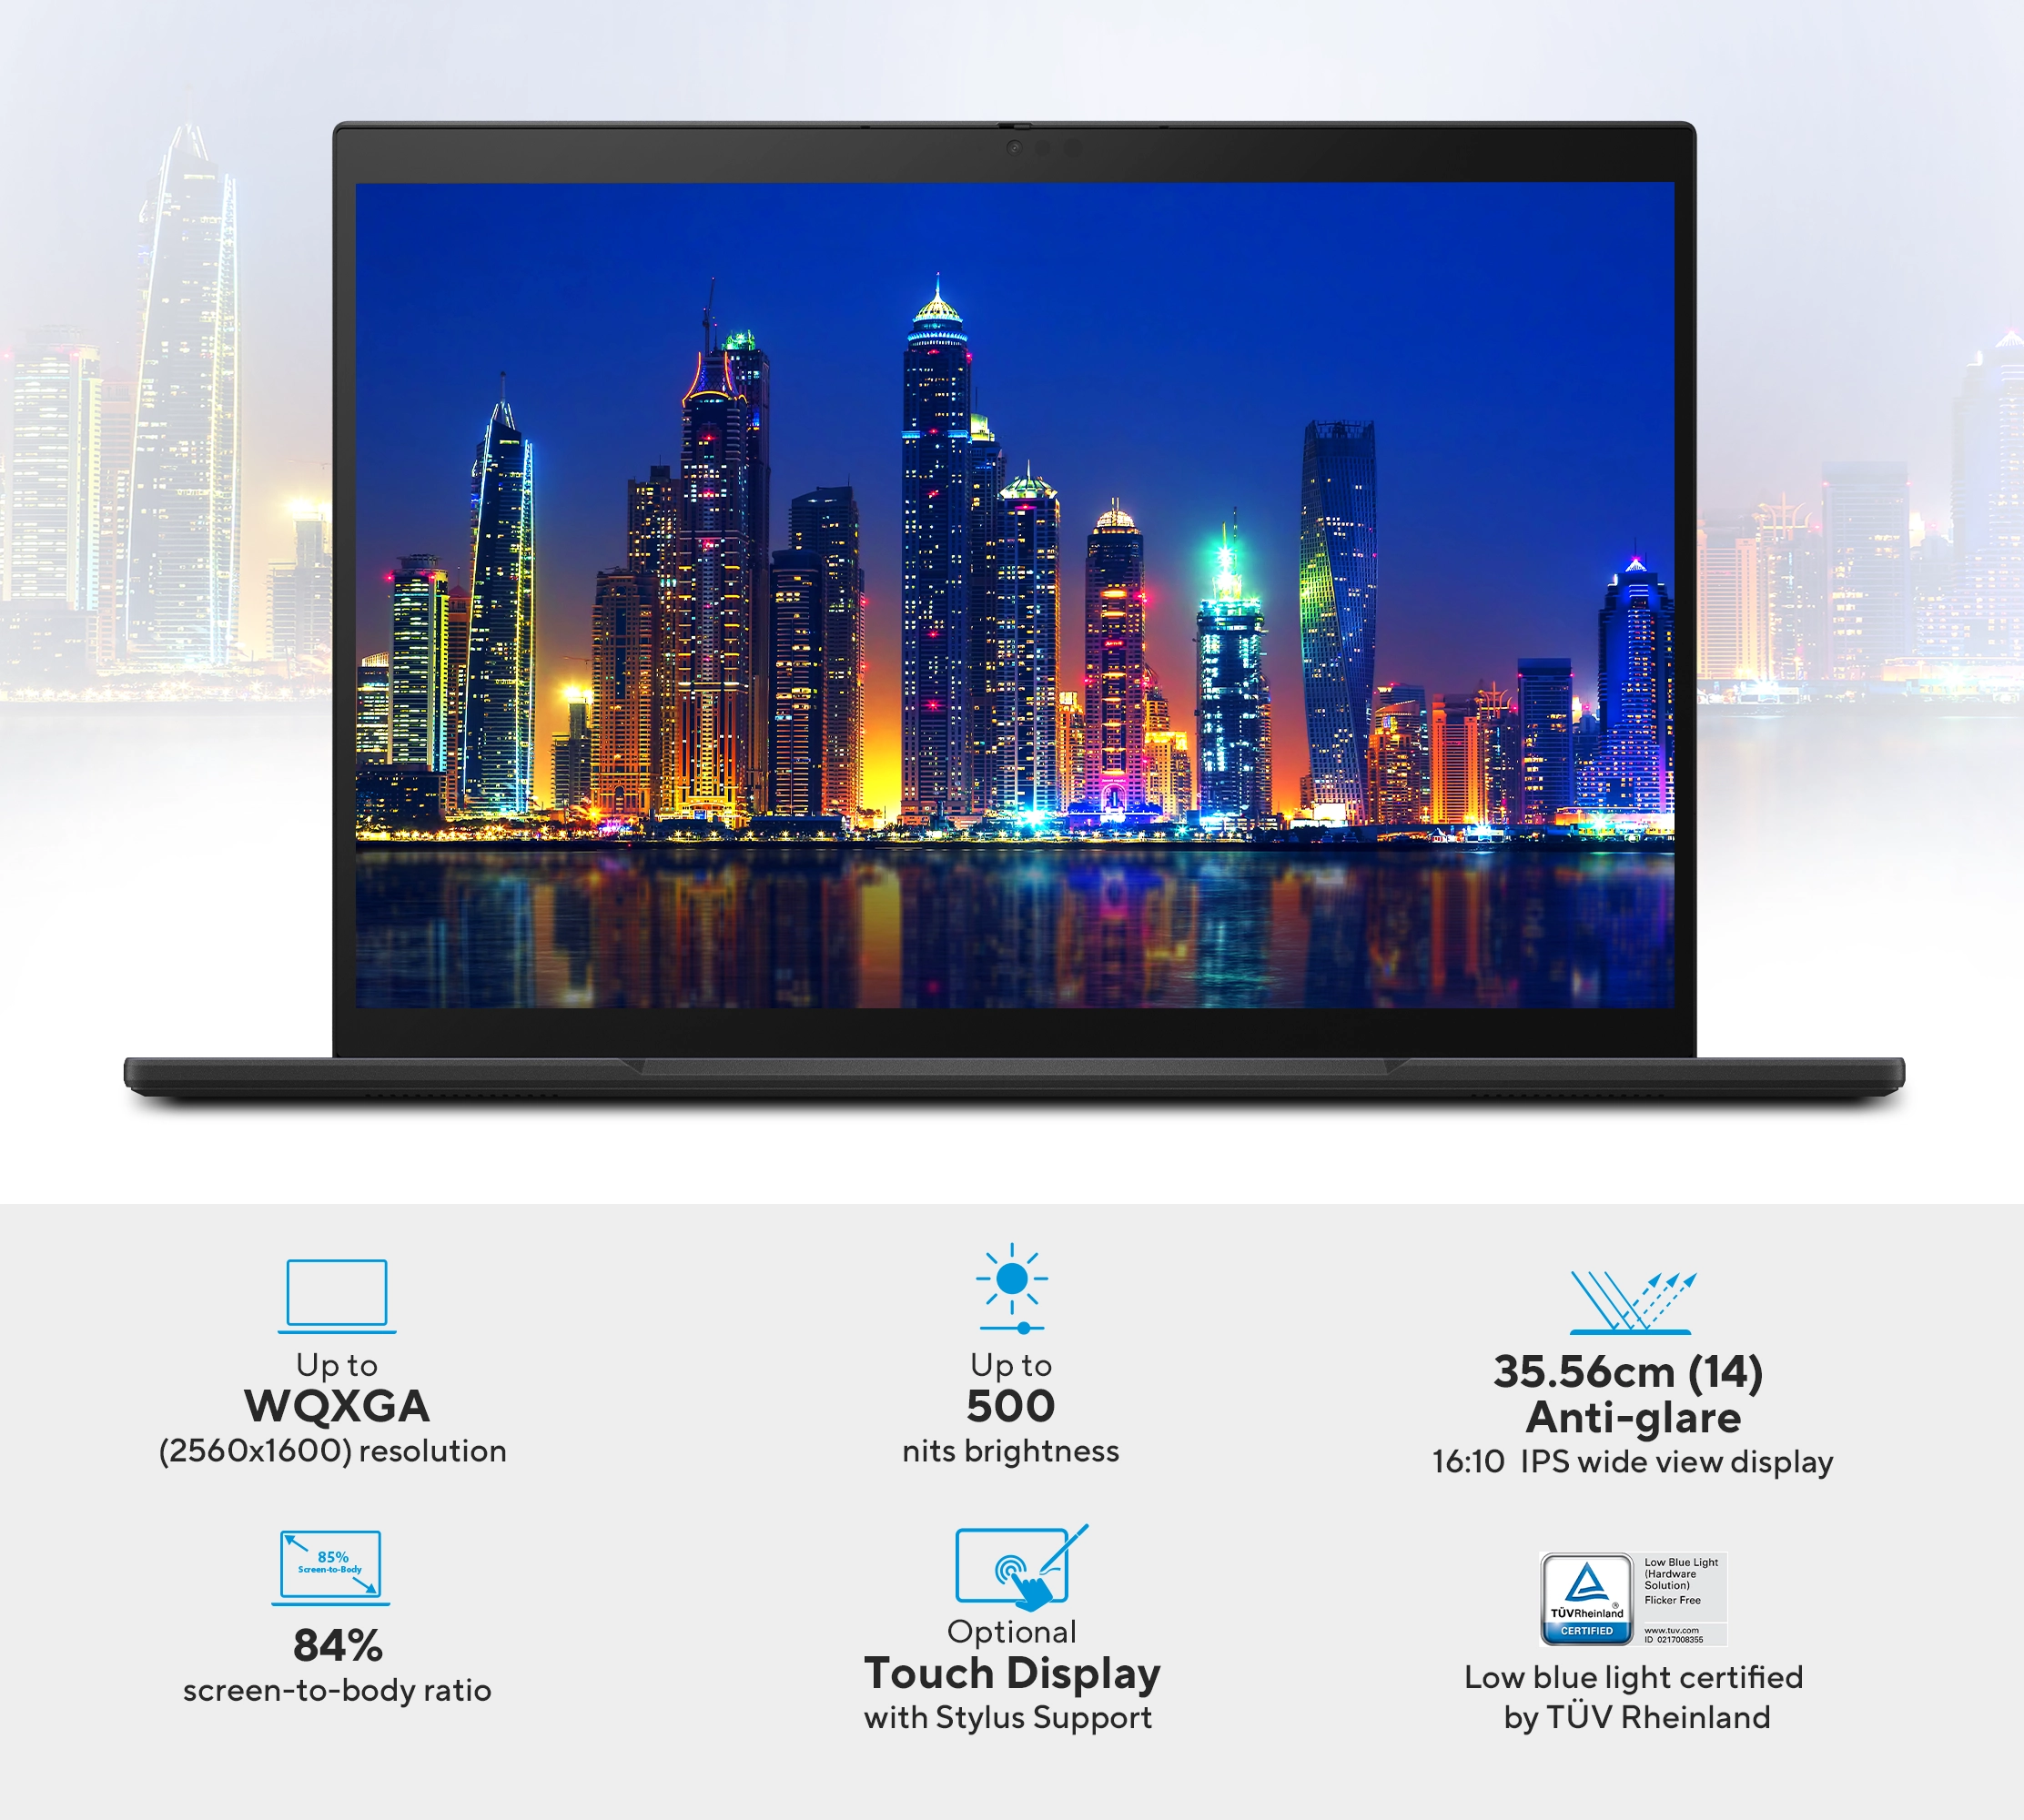 Enhance productivity with a cutting-edge 16:10 anti-glare IPS display featuring up to a vibrant WQXGA resolution of up to 2560 x 1600 for an outstanding viewing experience